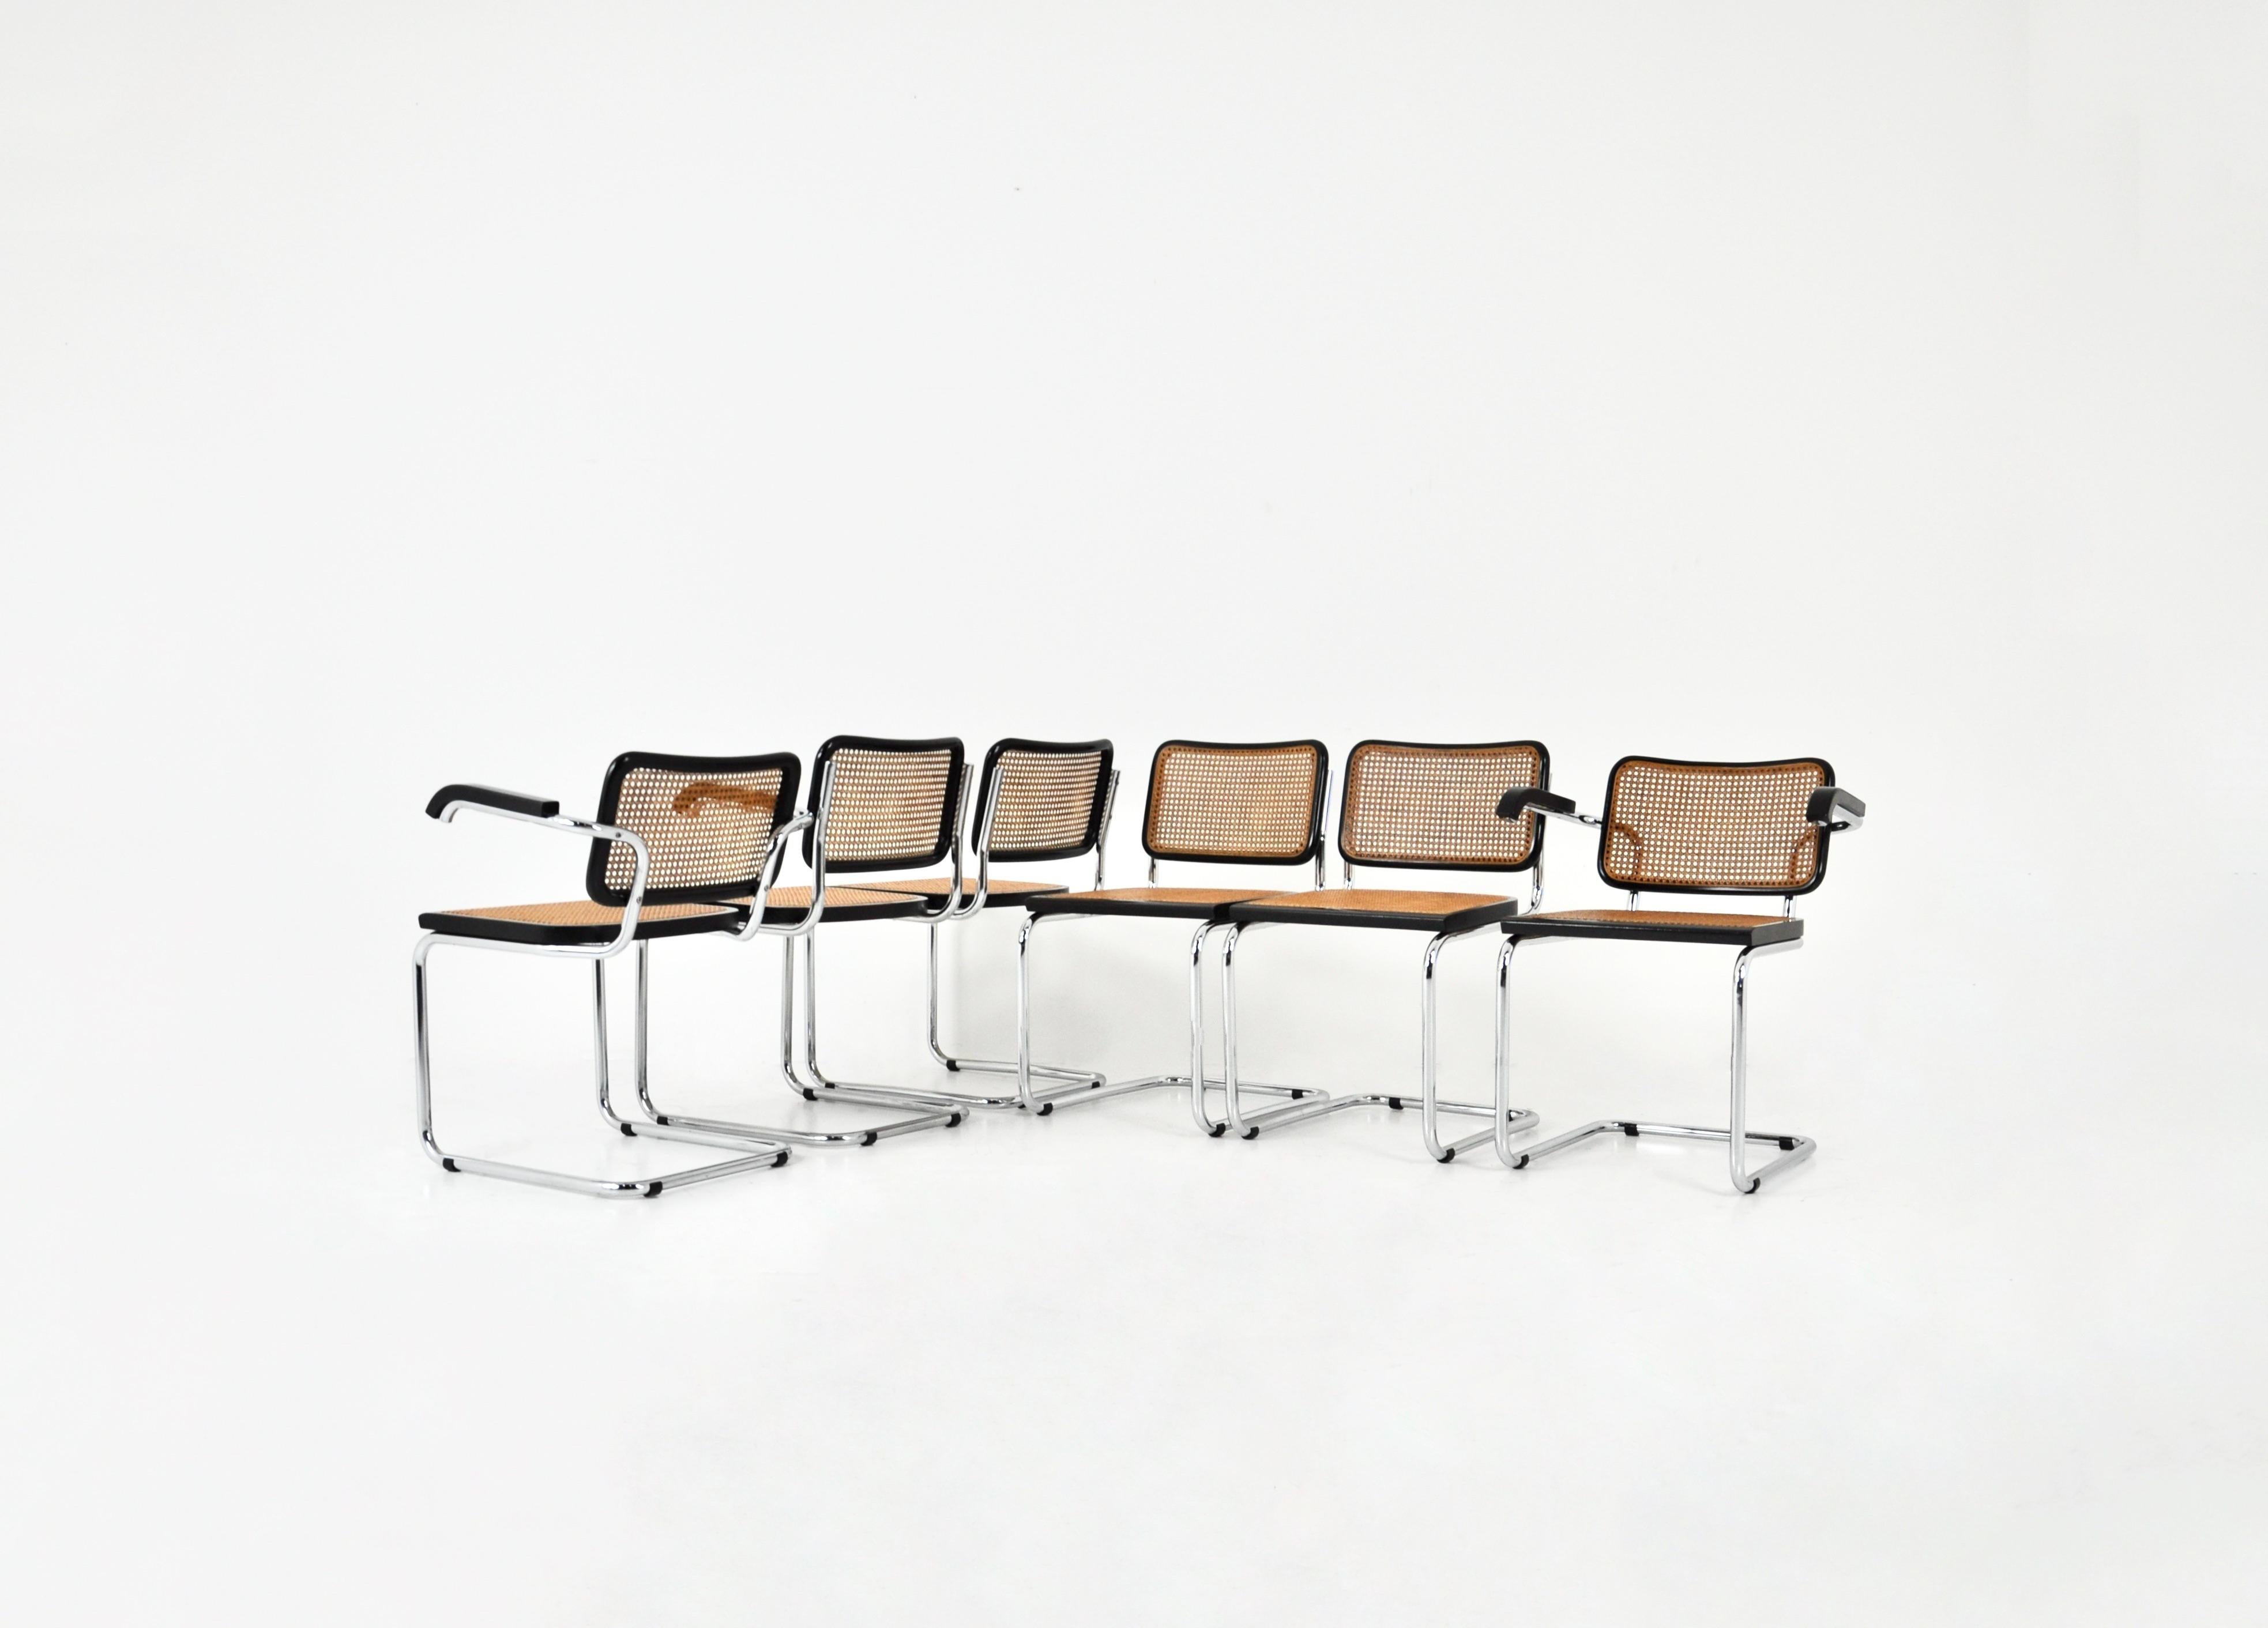 Set of 6 chairs in metal, wood and rattan. 2 with arms and 4 without arms. 
Dimensions: seat height: 47 cm. Width with armrests: 62 cm 
Wear due to time and age of the chairs. 


